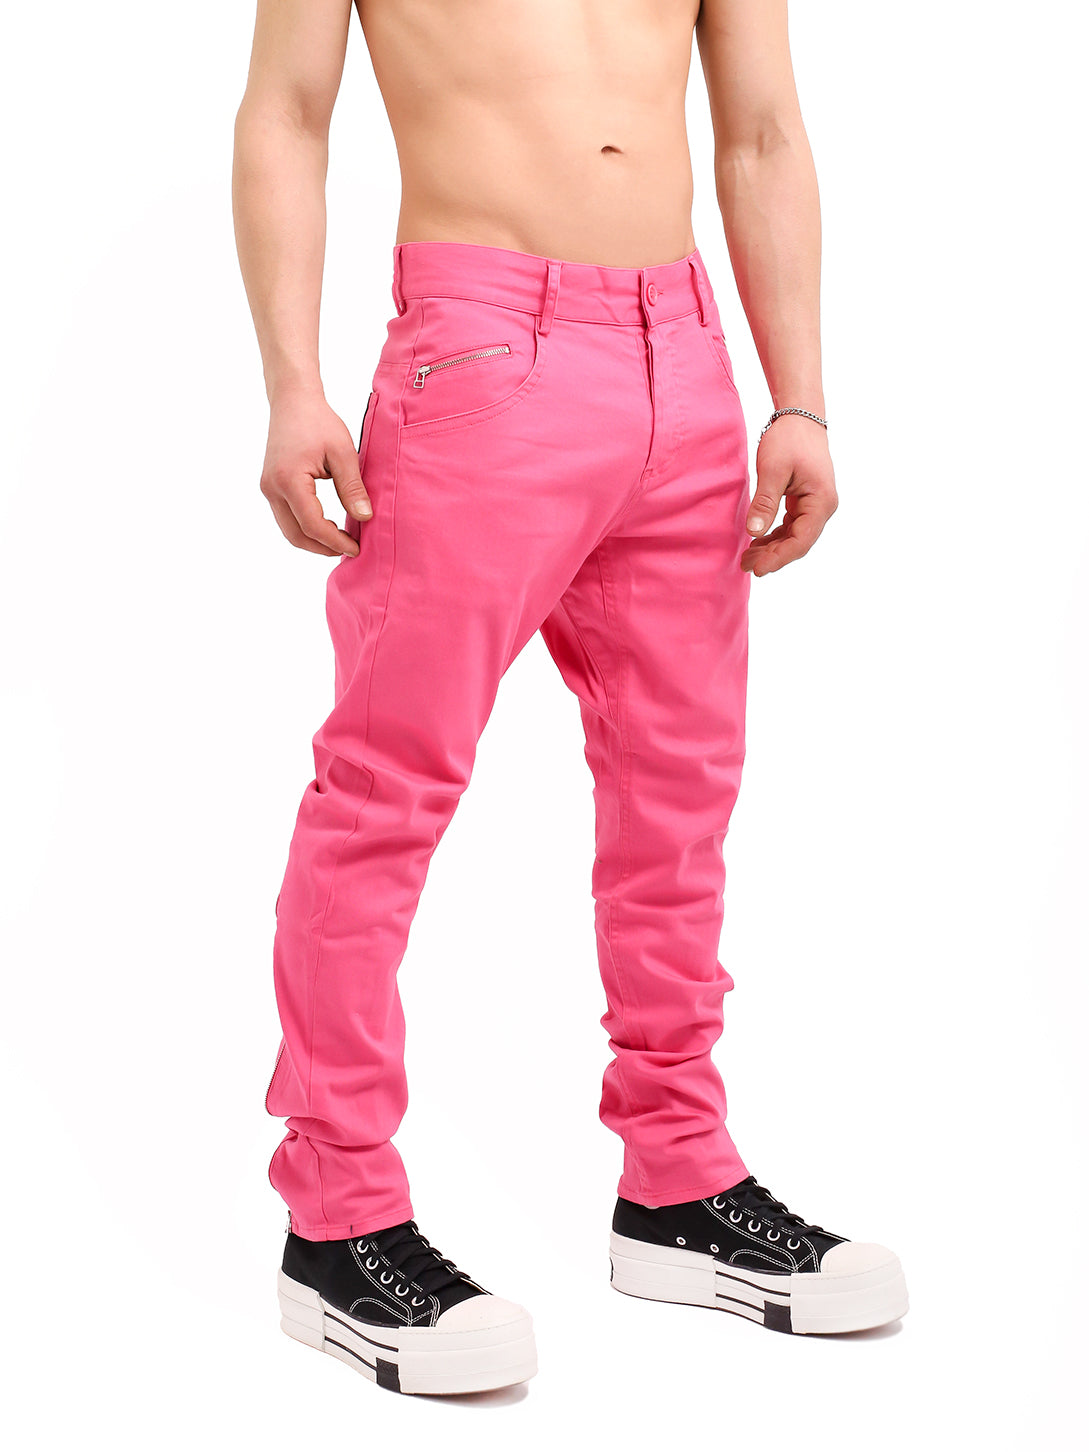 BRIGHT PINK STRAIGHT LEG JEANS WITH ZIP DETAIL